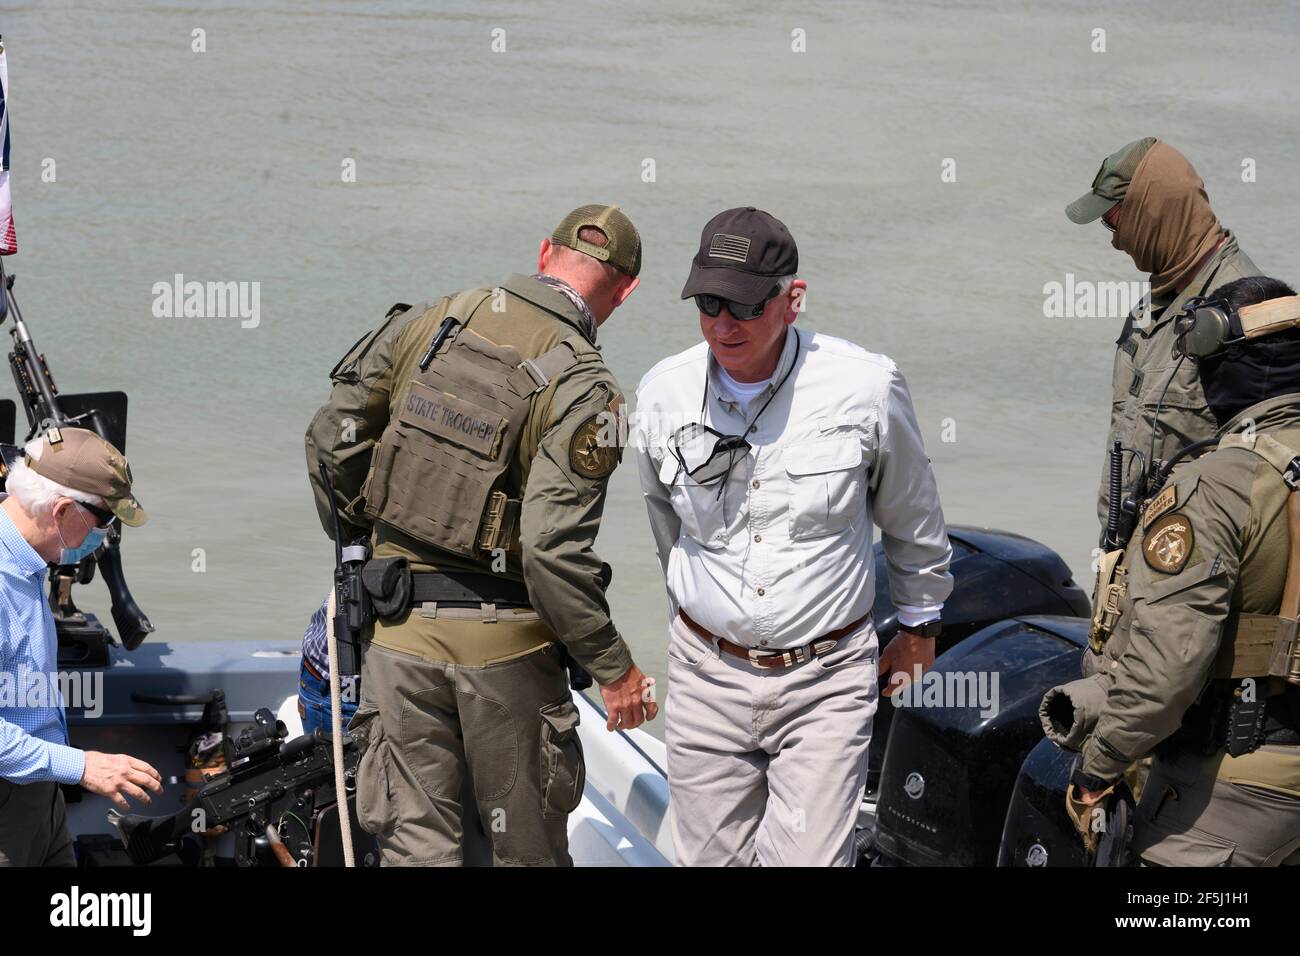 Granjeno, Texas USA, 26th Mar, 2021. Alabama Sen. TOMMY TUBERVILLE disembarks after a delegation of 18 Republican U.S. Senators rode on the Rio Grande River south of Mission in Texas Dept. of Public Safety gunboats at the end of a whirlwind tour of south Texas. The senators saw an overcrowded migrant processing center in Donna and a corpse floating in the river north of Anzalduas Park. Credit: Bob Daemmrich/Alamy Live News Stock Photo